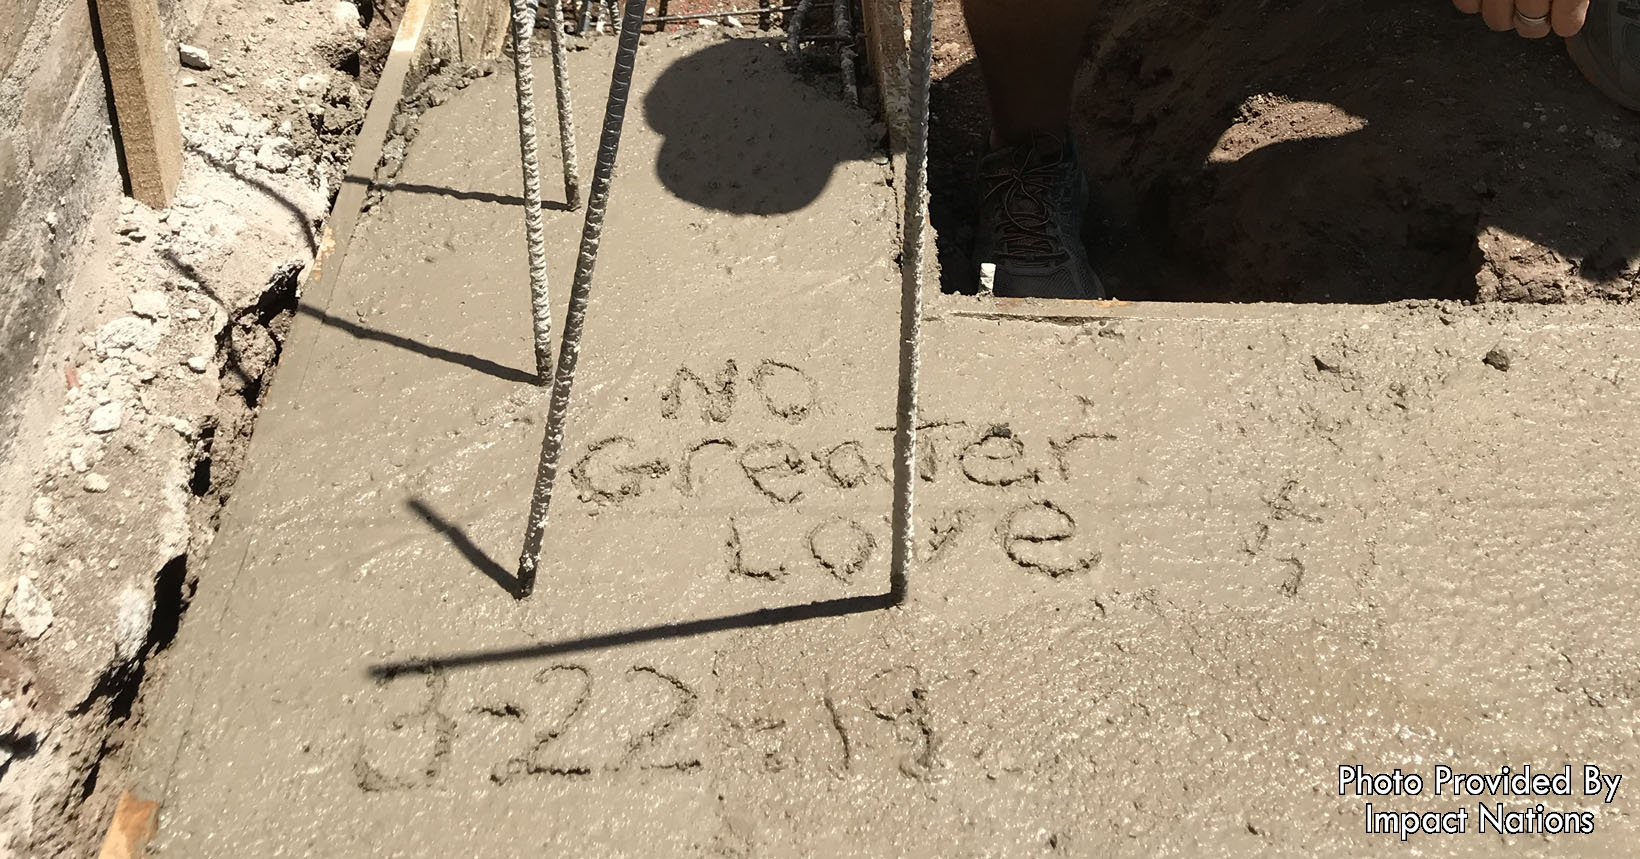 The footer of the first home inscribed with No Greater love and the date 3-22-19.